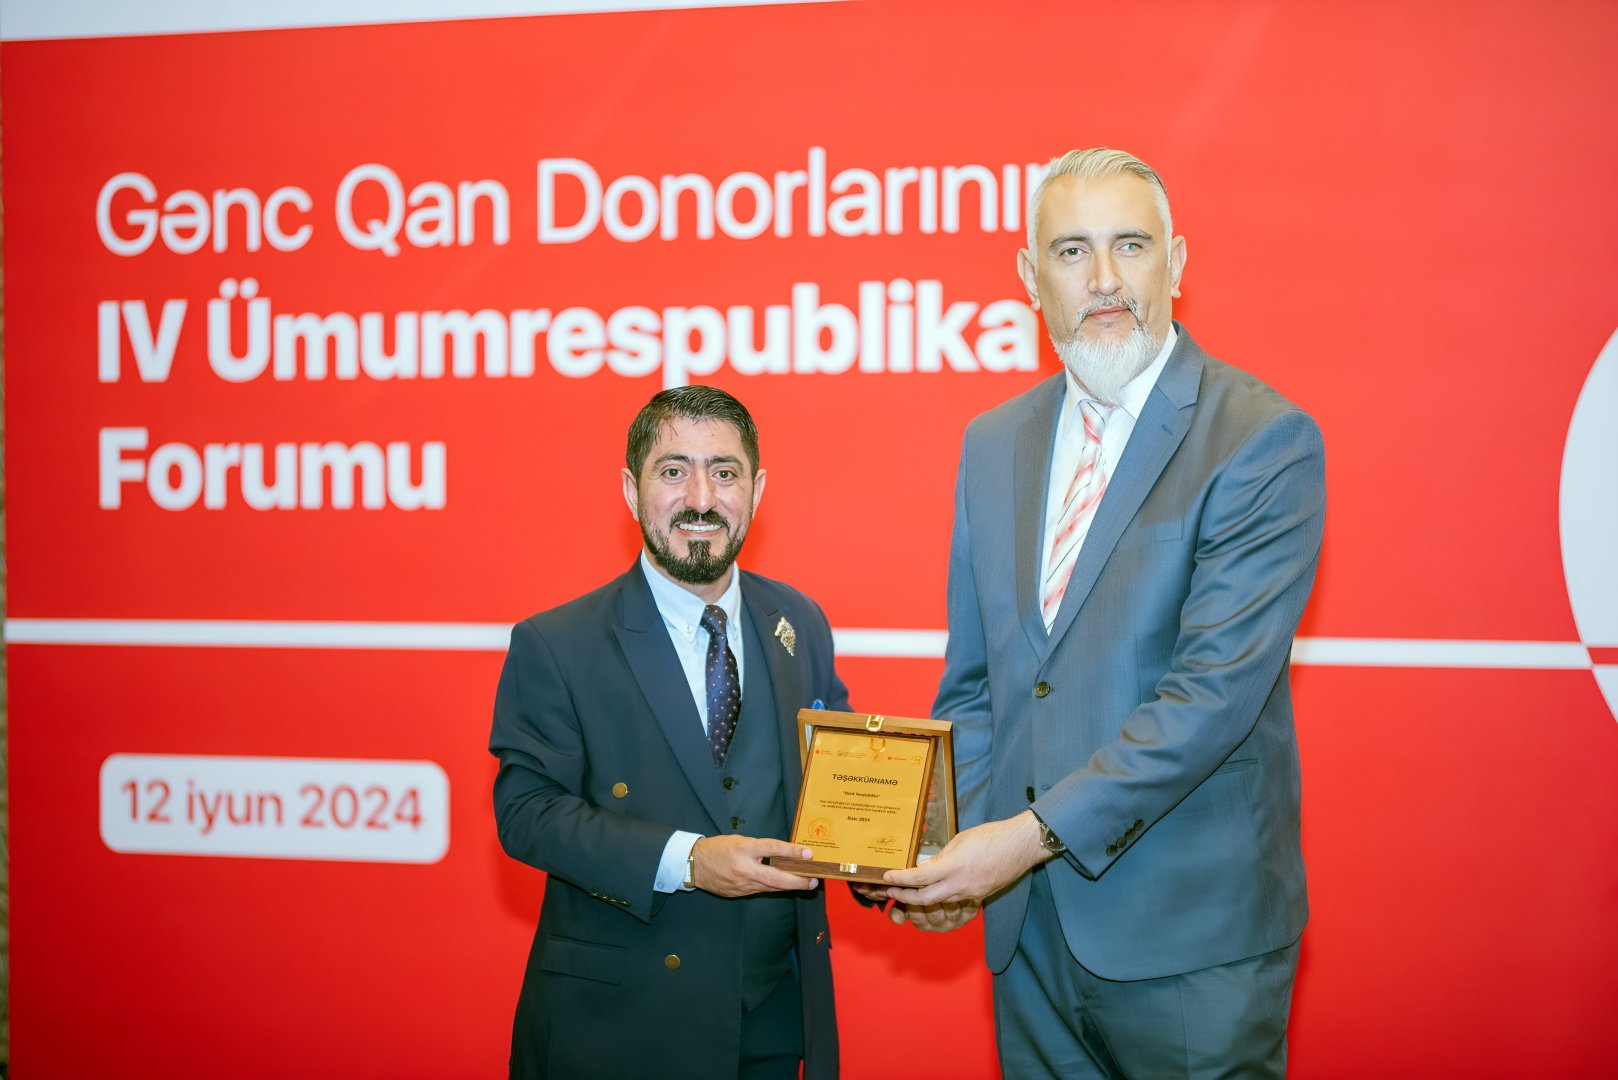 Bank Respublika awarded for active participation in blood donation (PHOTO)